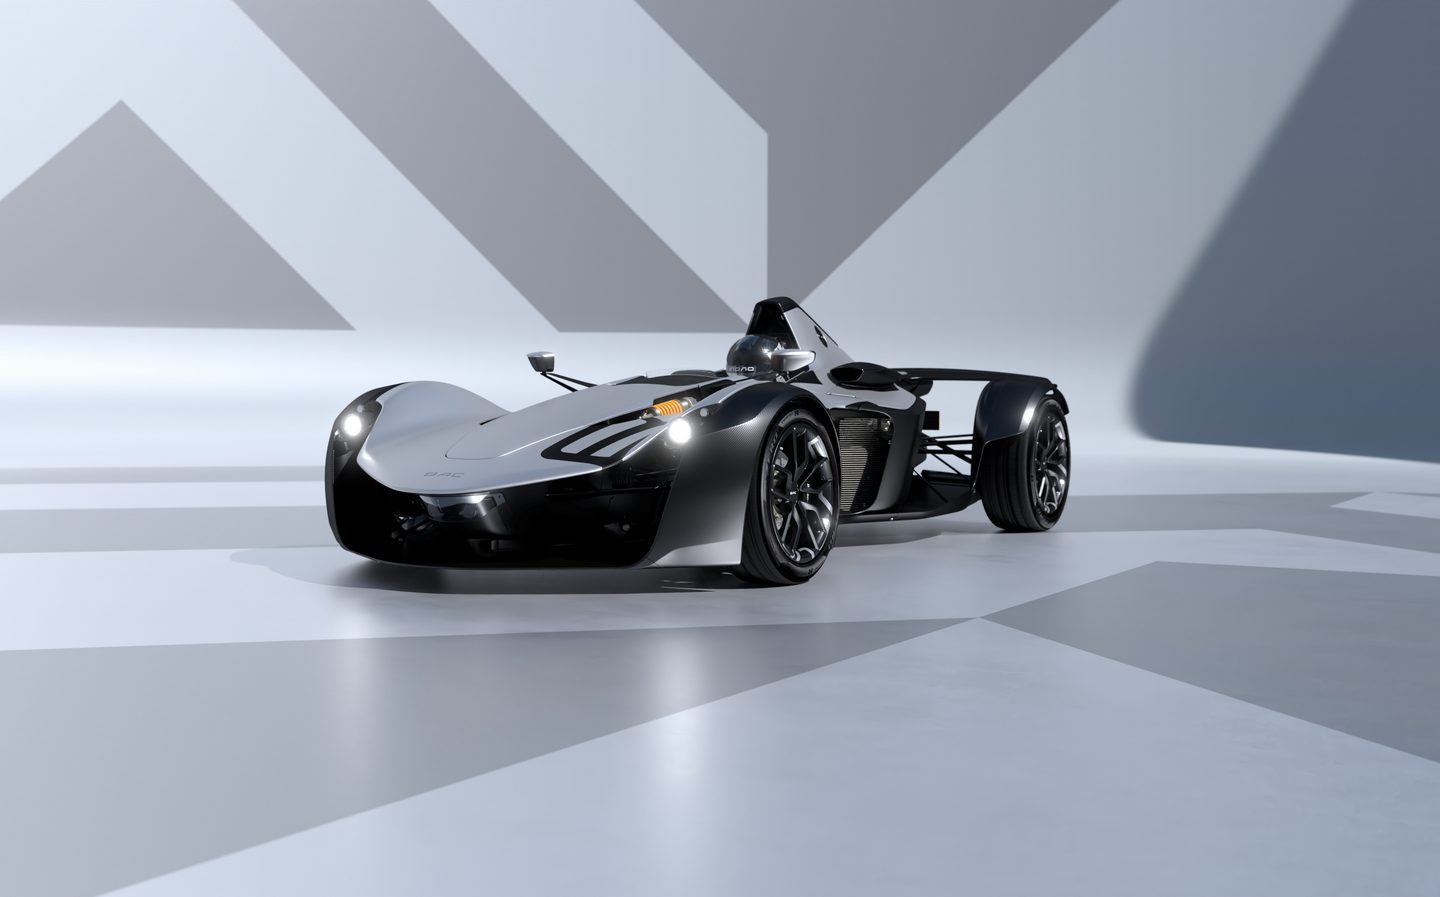 british sports cars, mono, monterey car week, sport, track day cars, new bac mono weighs just 570kg, hits 60mph in 2.7sec